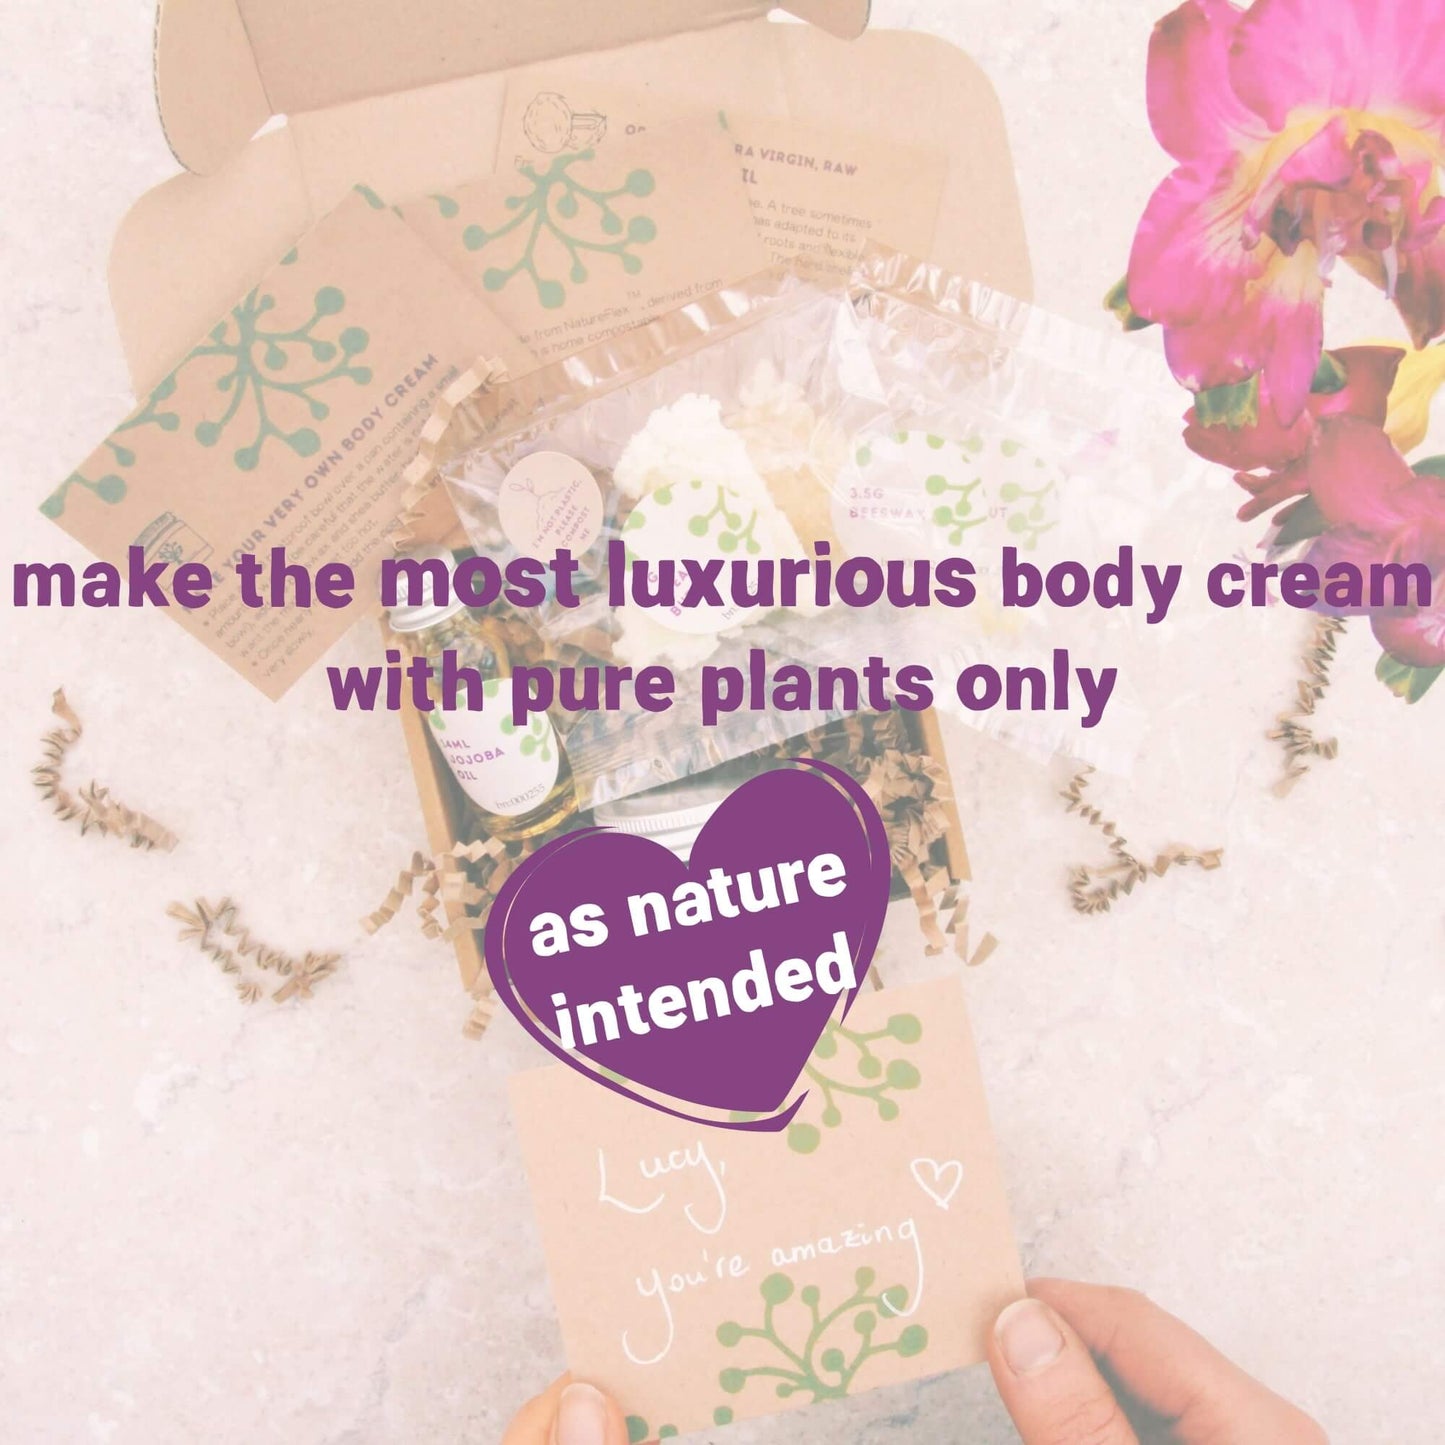 25th birthday gift for making luxurious body cream in minutes